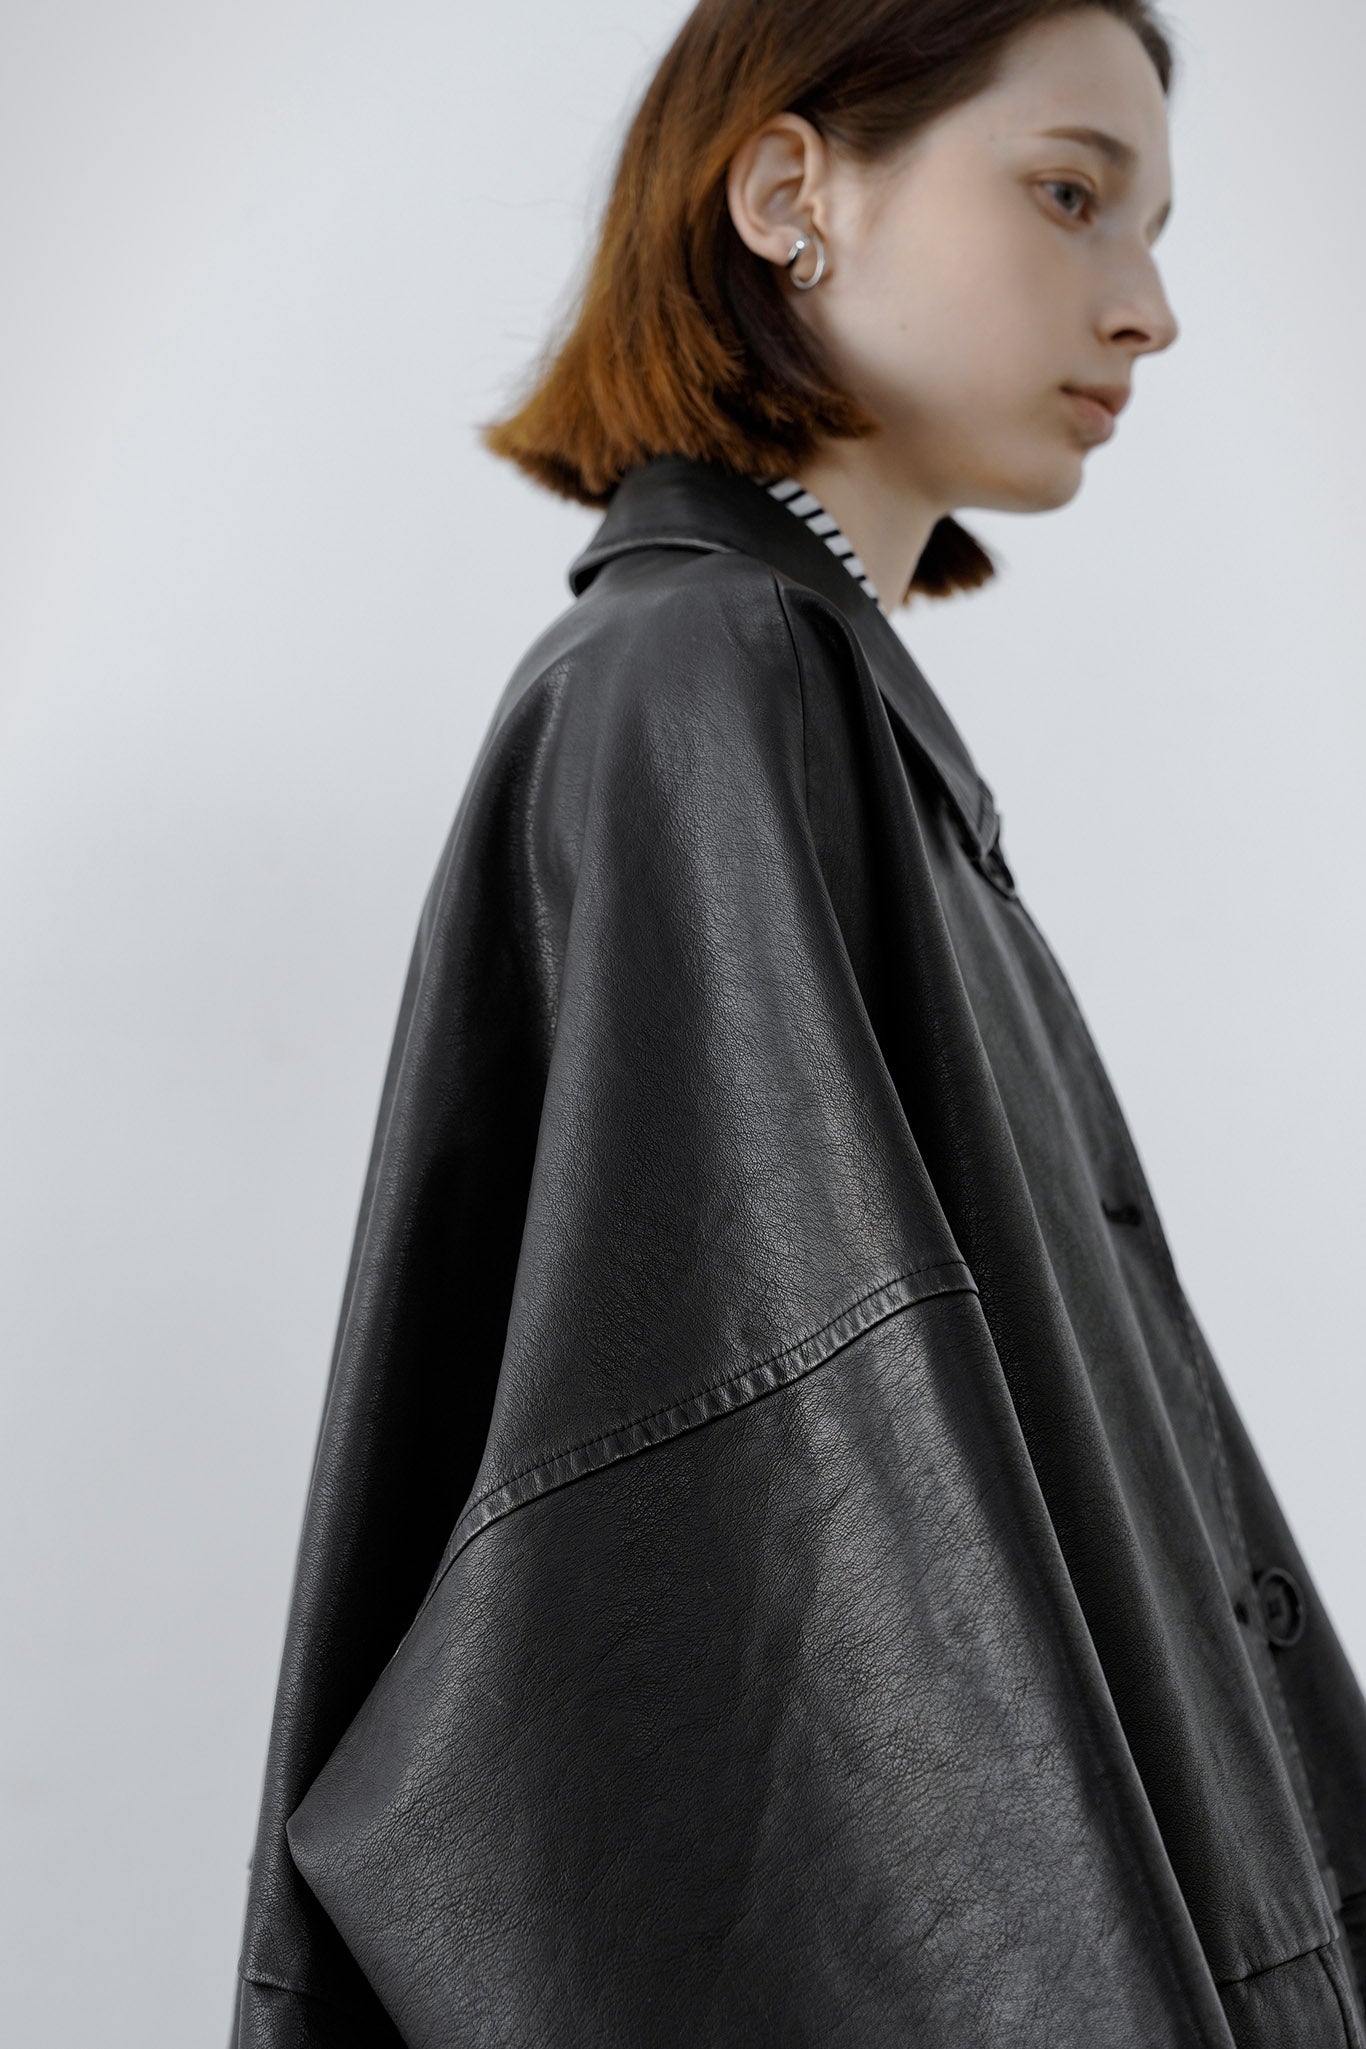 [tageechita] Over silhouette leather jacket